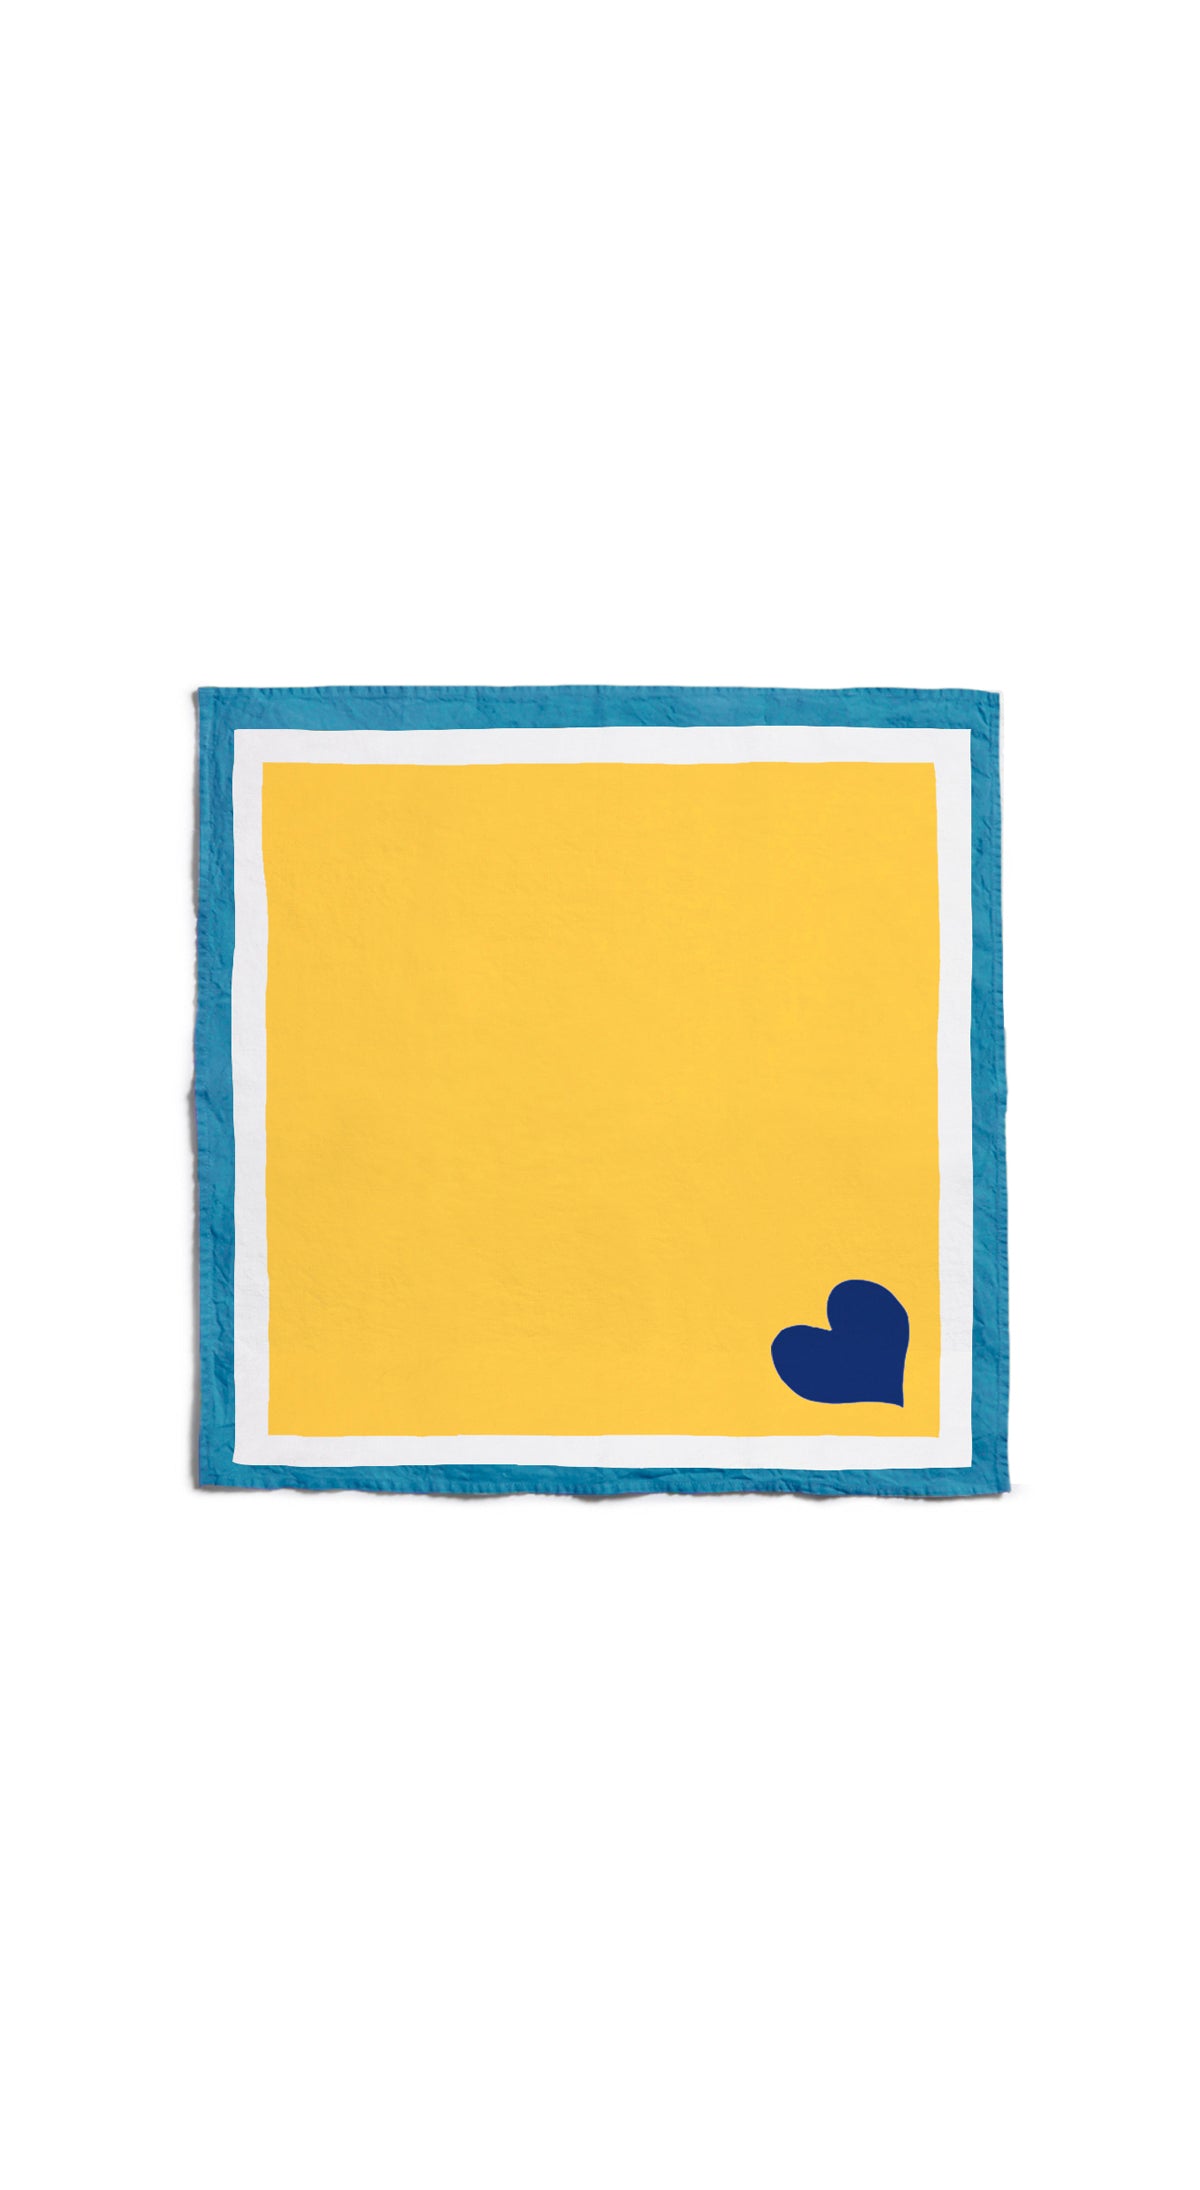 Summerill & Bishop x Lisou Heart Linen Napkin in Light Blue and Yellow, 50x50cm